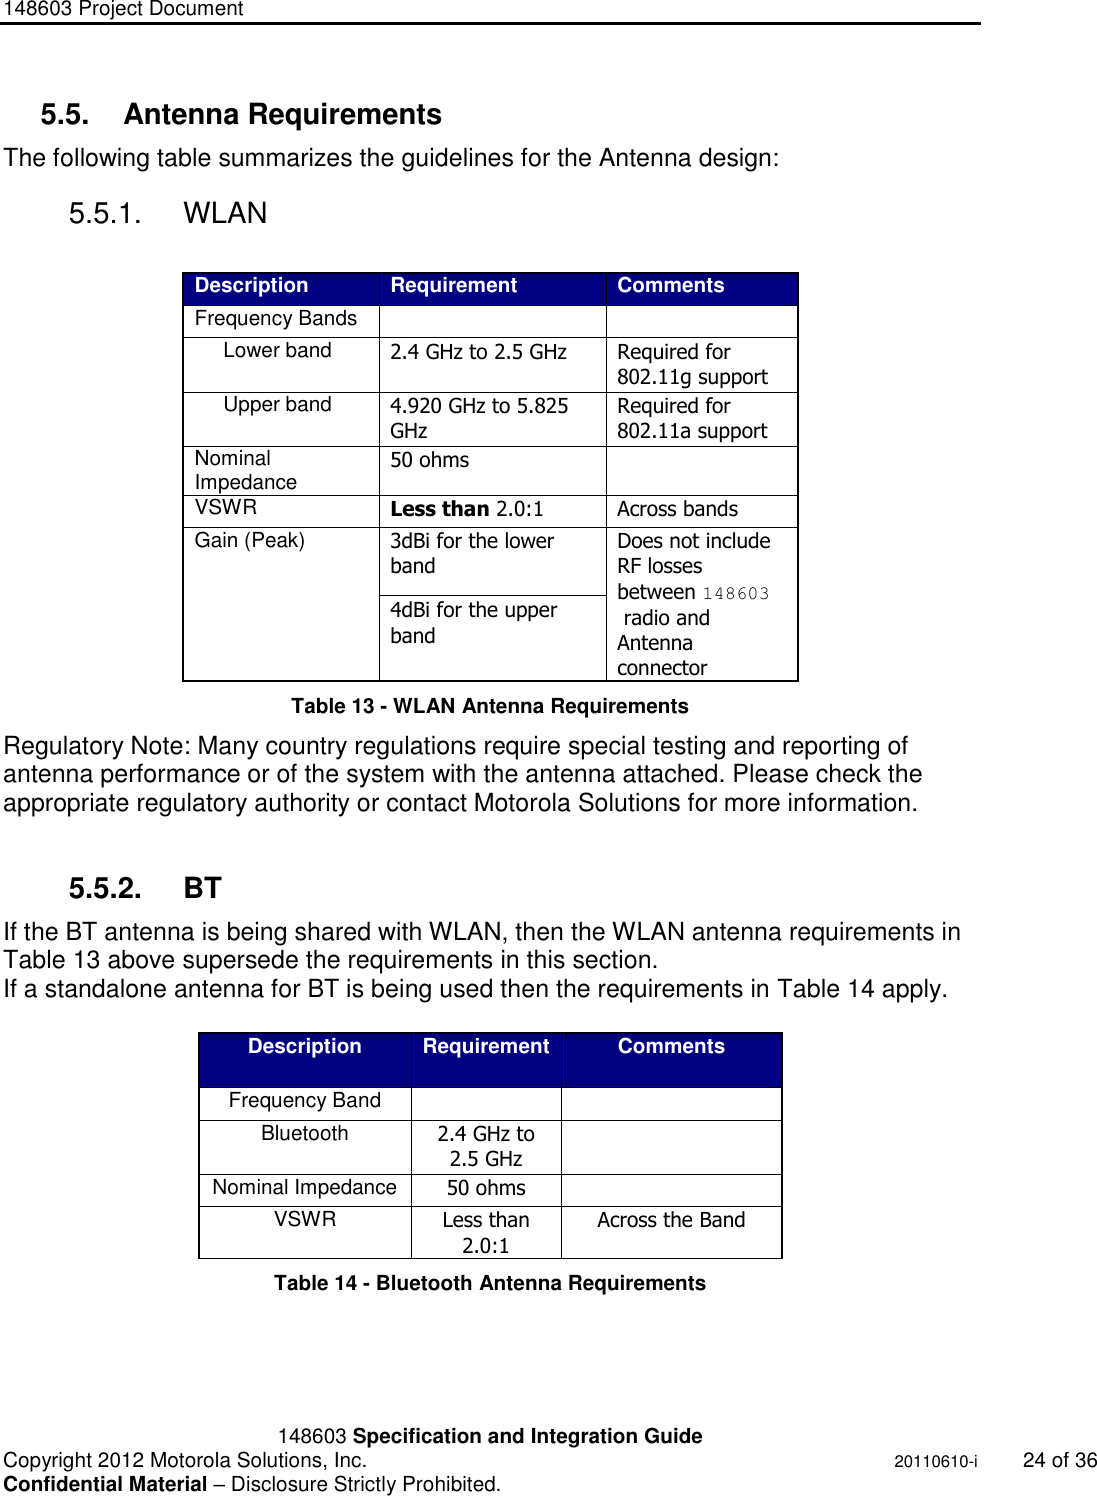 148603 Project Document       148603 Specification and Integration Guide  Copyright 2012 Motorola Solutions, Inc.    20110610-i 24 of 36 Confidential Material – Disclosure Strictly Prohibited. &quot;Ni ckel Leucochroic  Puffin&quot; 5.5.  Antenna Requirements The following table summarizes the guidelines for the Antenna design: 5.5.1.  WLAN  Description Requirement Comments Frequency Bands          Lower band 2.4 GHz to 2.5 GHz Required for 802.11g support      Upper band 4.920 GHz to 5.825 GHz Required for 802.11a support Nominal Impedance 50 ohms   VSWR Less than 2.0:1 Across bands Gain (Peak) 3dBi for the lower band Does not include RF losses between 148603  radio and Antenna connector 4dBi for the upper band Table 13 - WLAN Antenna Requirements Regulatory Note: Many country regulations require special testing and reporting of antenna performance or of the system with the antenna attached. Please check the appropriate regulatory authority or contact Motorola Solutions for more information.  5.5.2.  BT If the BT antenna is being shared with WLAN, then the WLAN antenna requirements in Table 13 above supersede the requirements in this section. If a standalone antenna for BT is being used then the requirements in Table 14 apply.  Description Requirement Comments Frequency Band   Bluetooth 2.4 GHz to 2.5 GHz  Nominal Impedance 50 ohms  VSWR Less than 2.0:1 Across the Band Table 14 - Bluetooth Antenna Requirements  